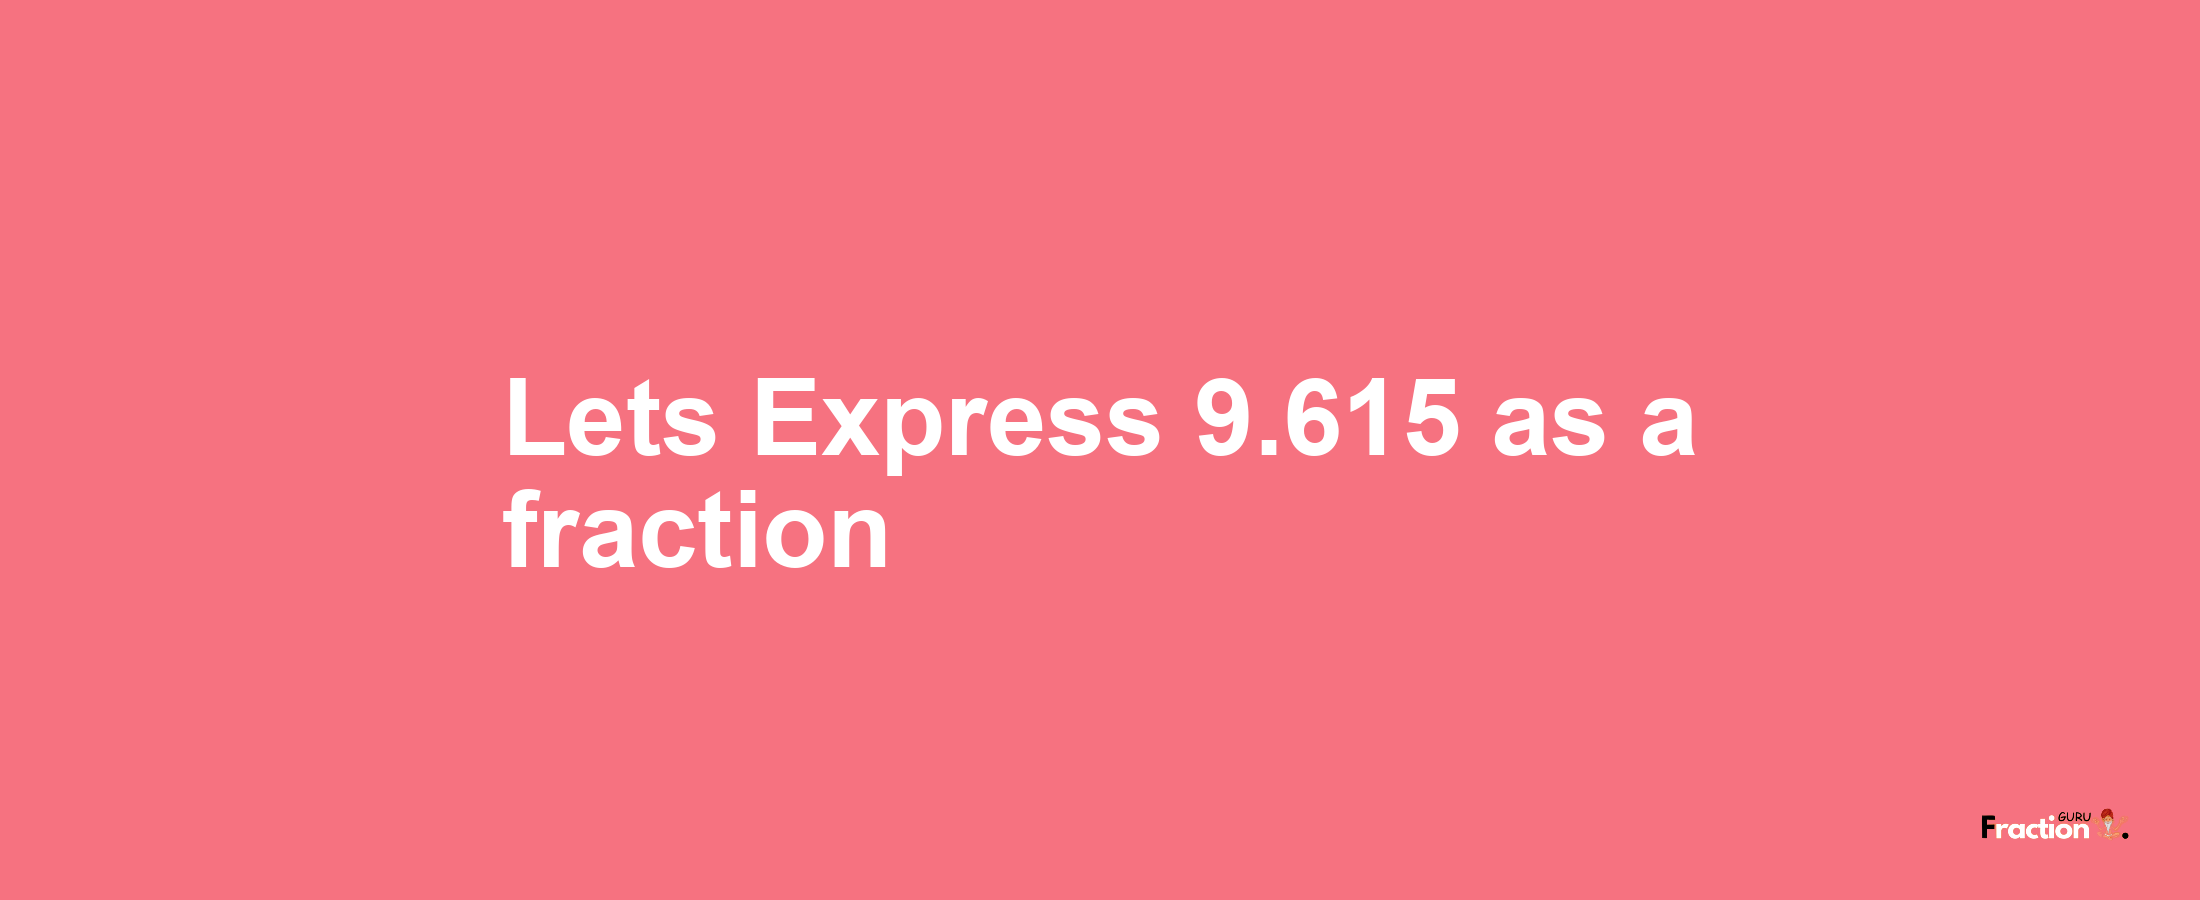 Lets Express 9.615 as afraction